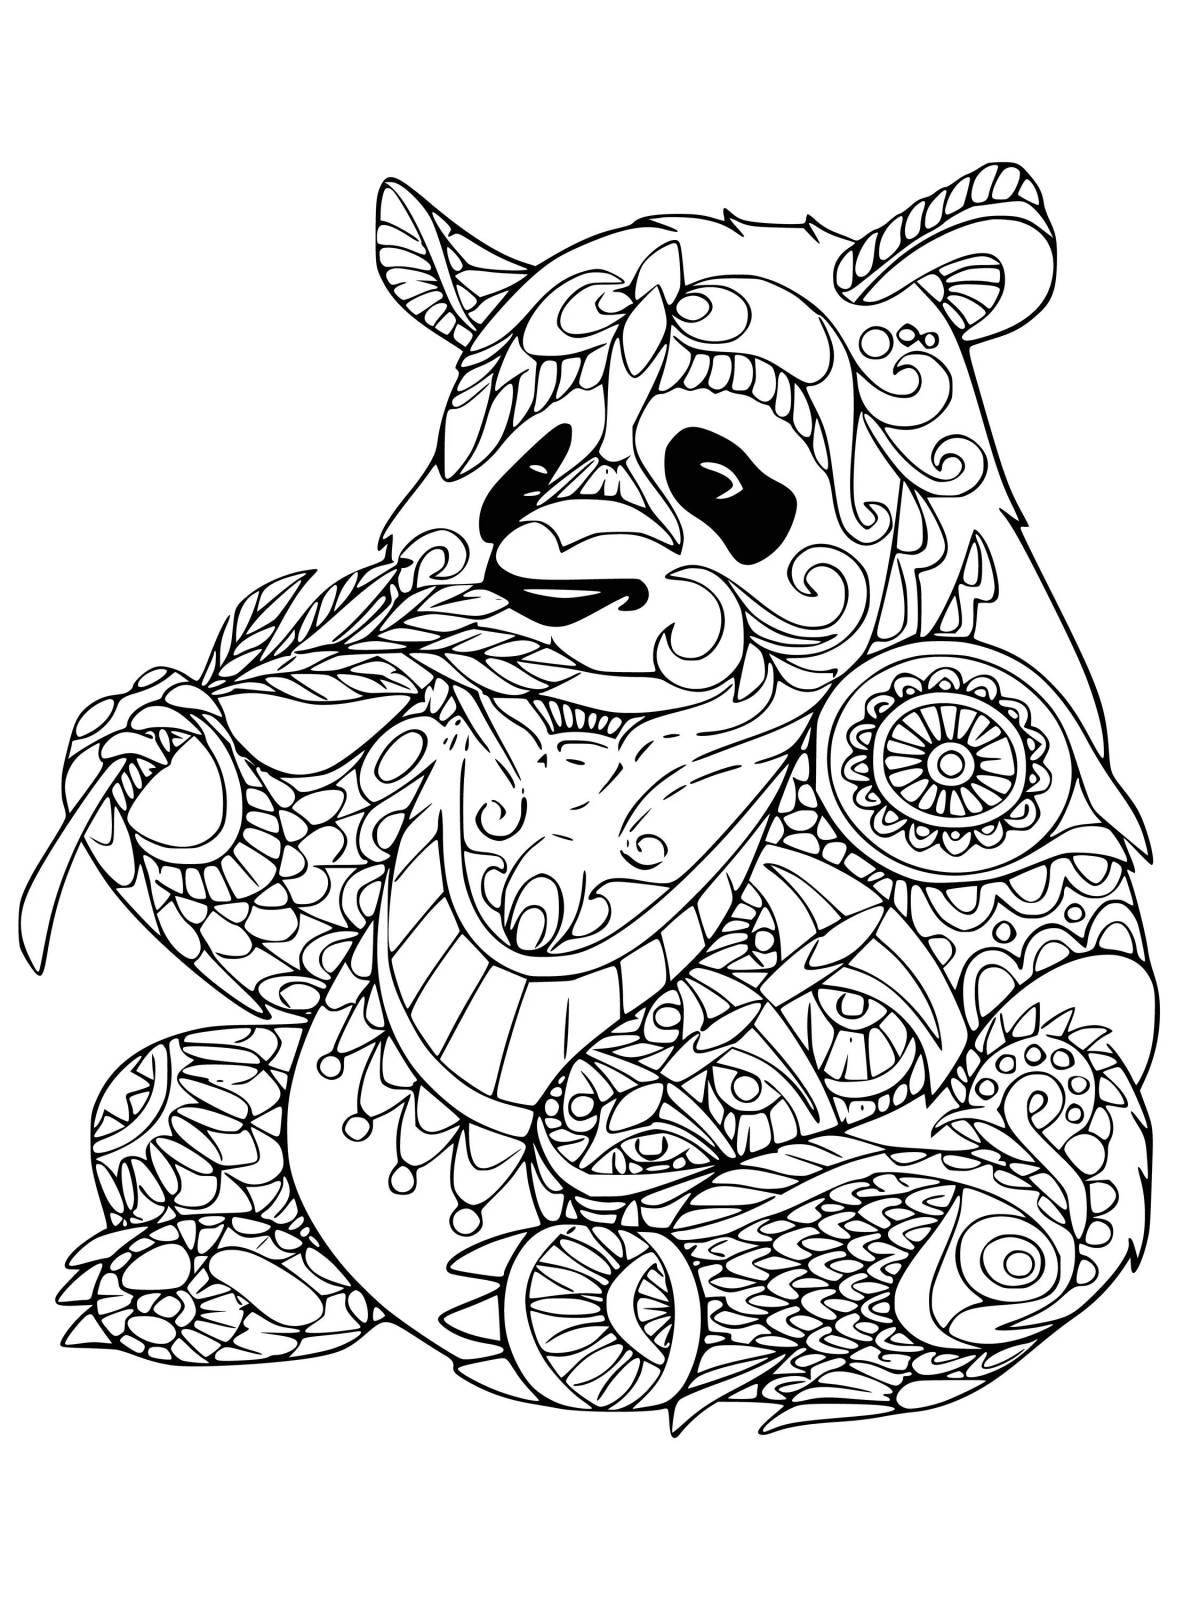 Entertaining anti-stress coloring book for adults